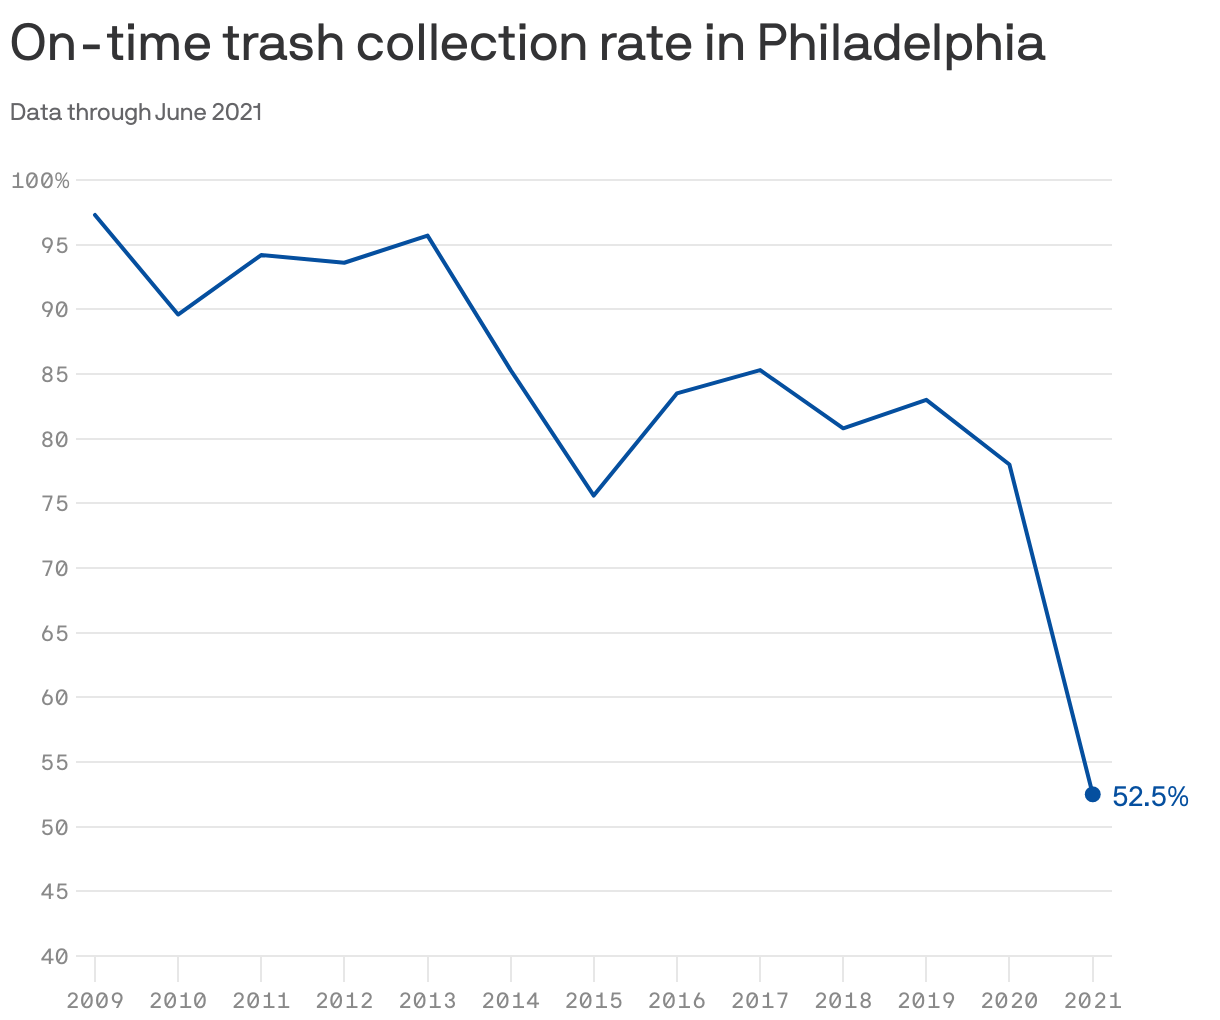 On-time trash collection rate in Philadelphia